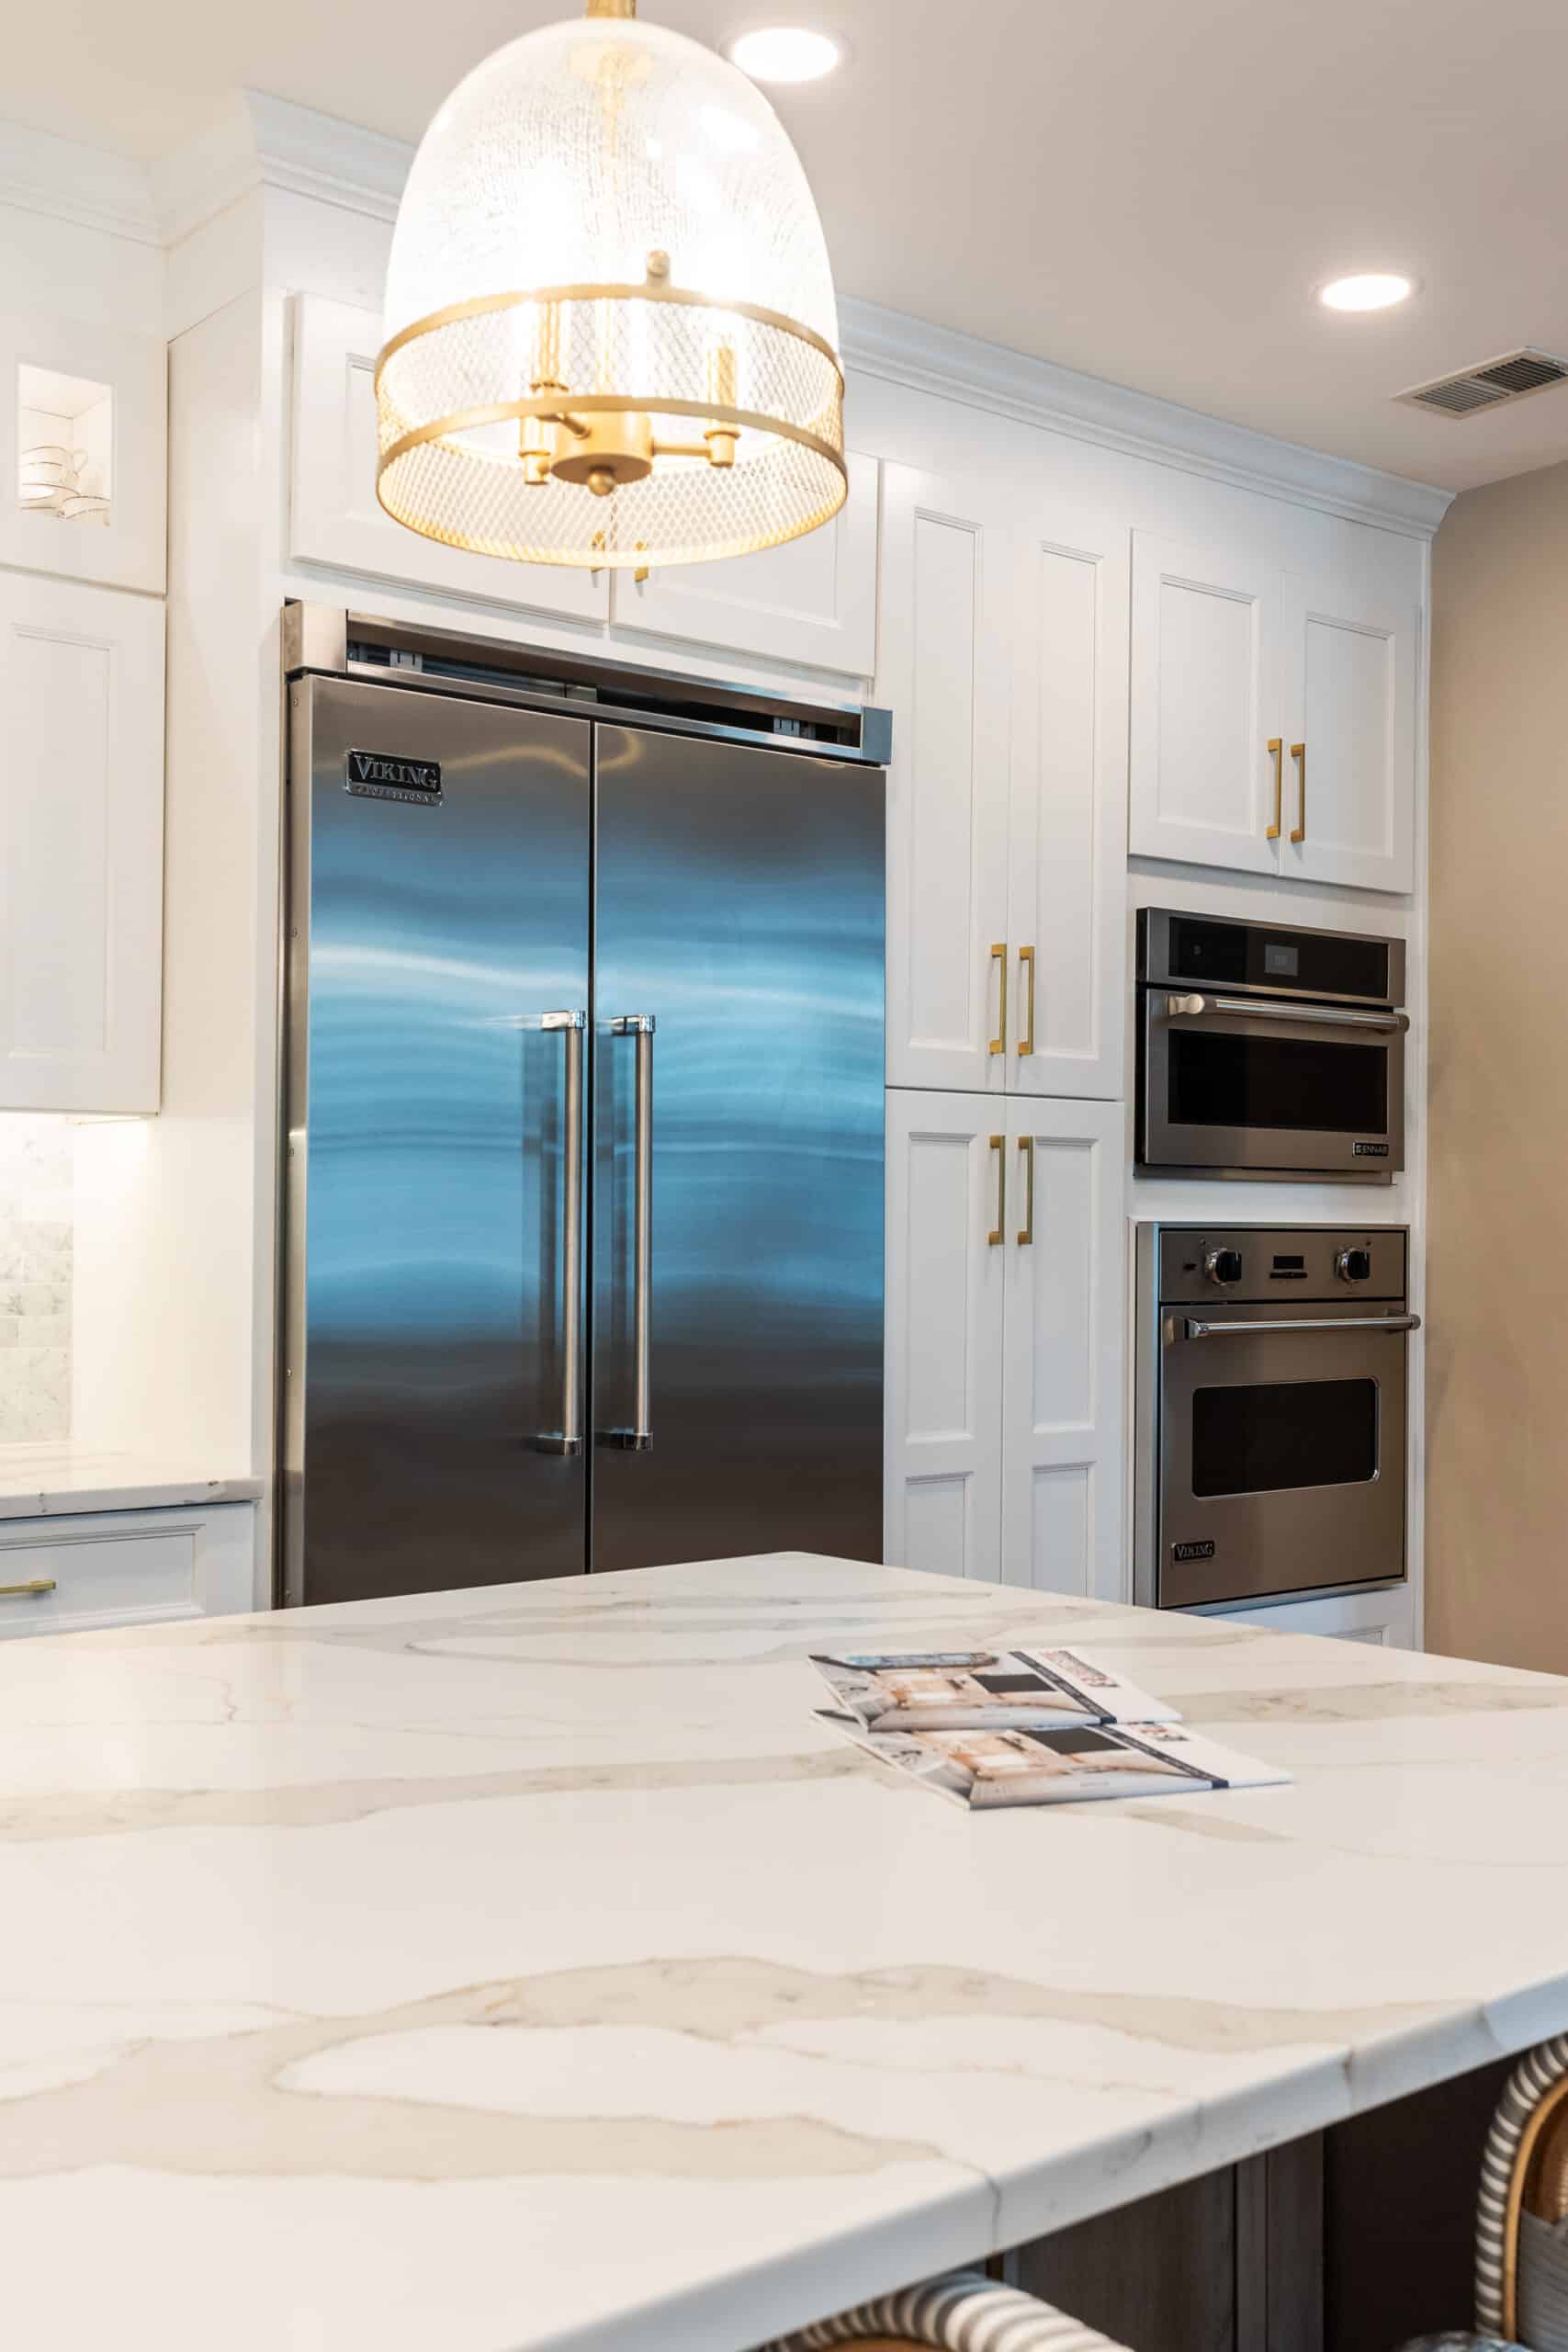 A kitchen with elegant marble countertops and sleek white cabinets